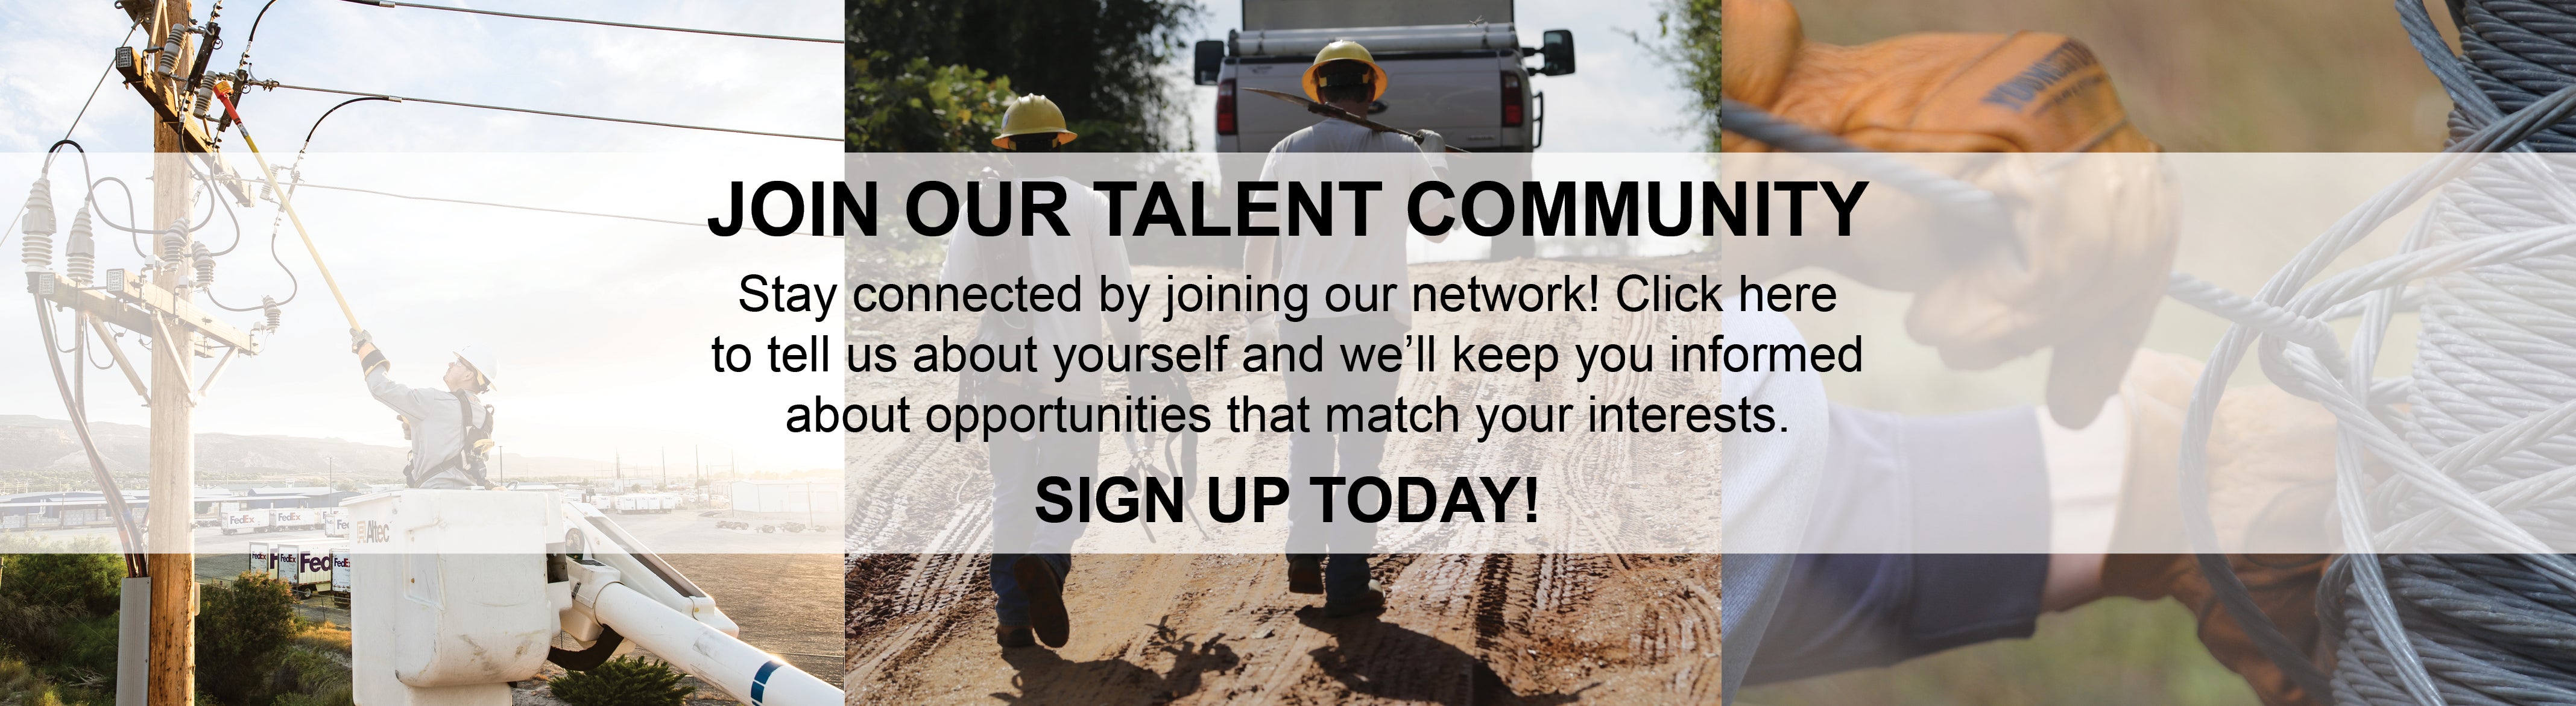 Link to form to join talent network